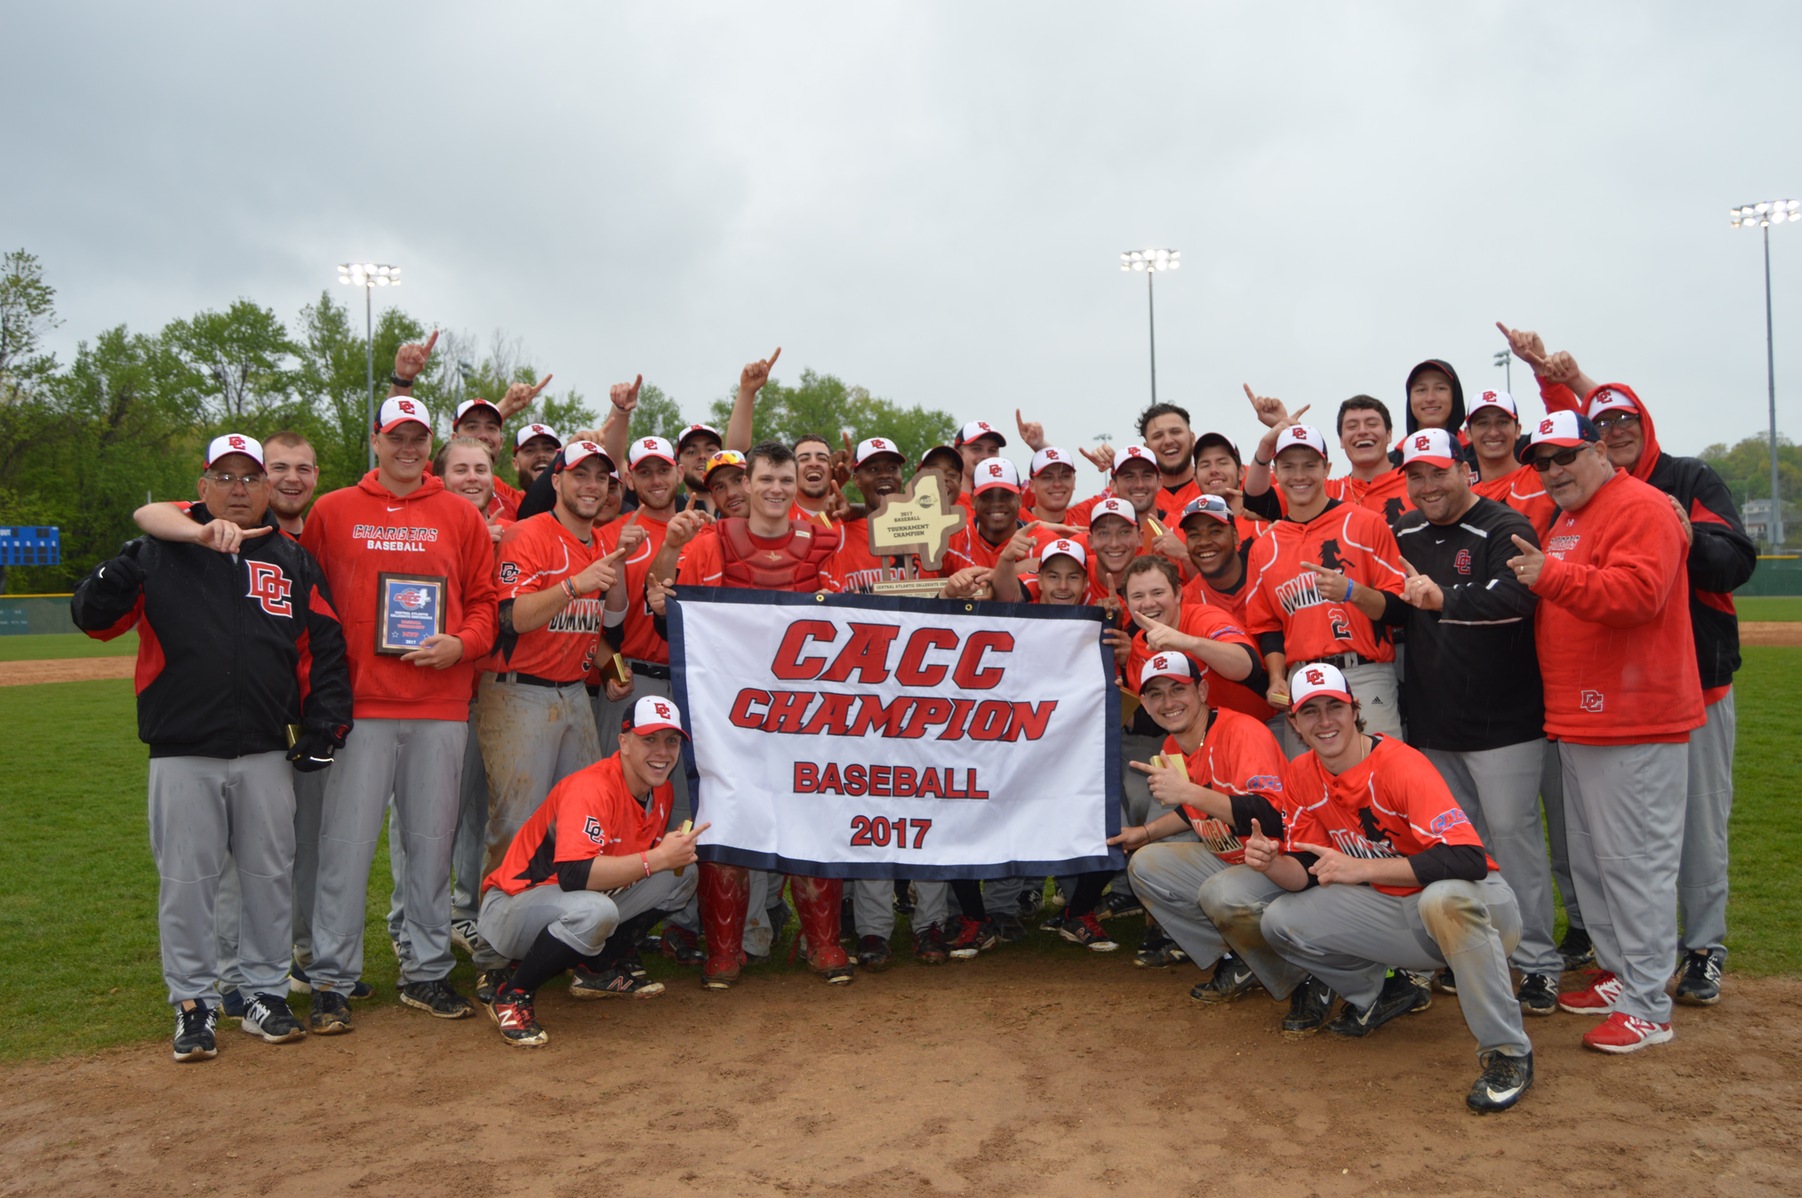 DOMINICAN WINS 2ND GAME AGAINST CHC TO CLAIM 2017 CACC BASEBALL CHAMPIONSHIP